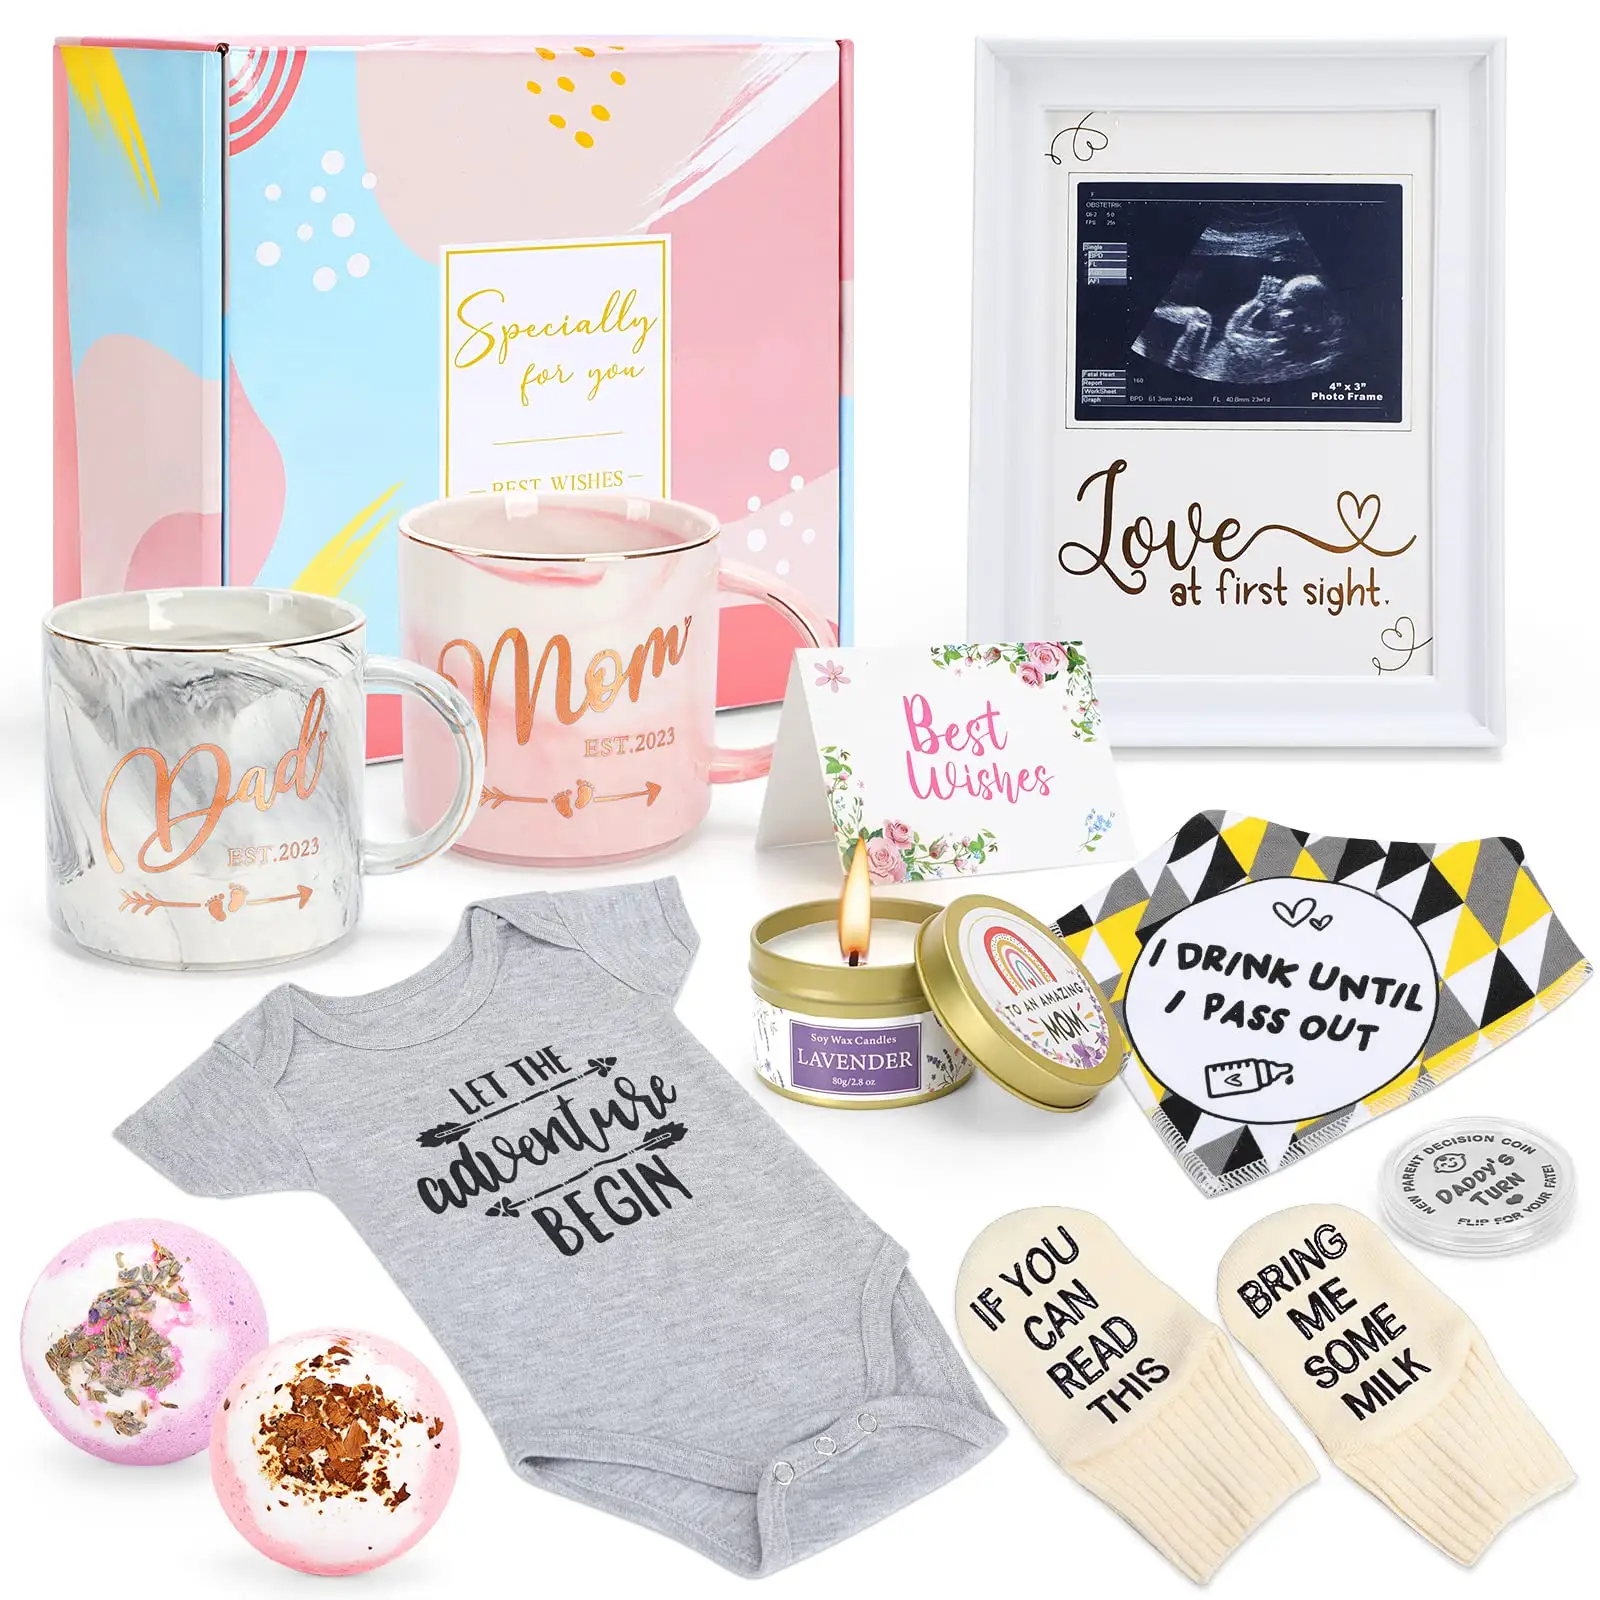 Pregnancy Gifts for New Parents Est 2023,First Time New Mom Gifts for Pregnancy Announcement,Baby Gifts Basket - Mom & Dad Mugs